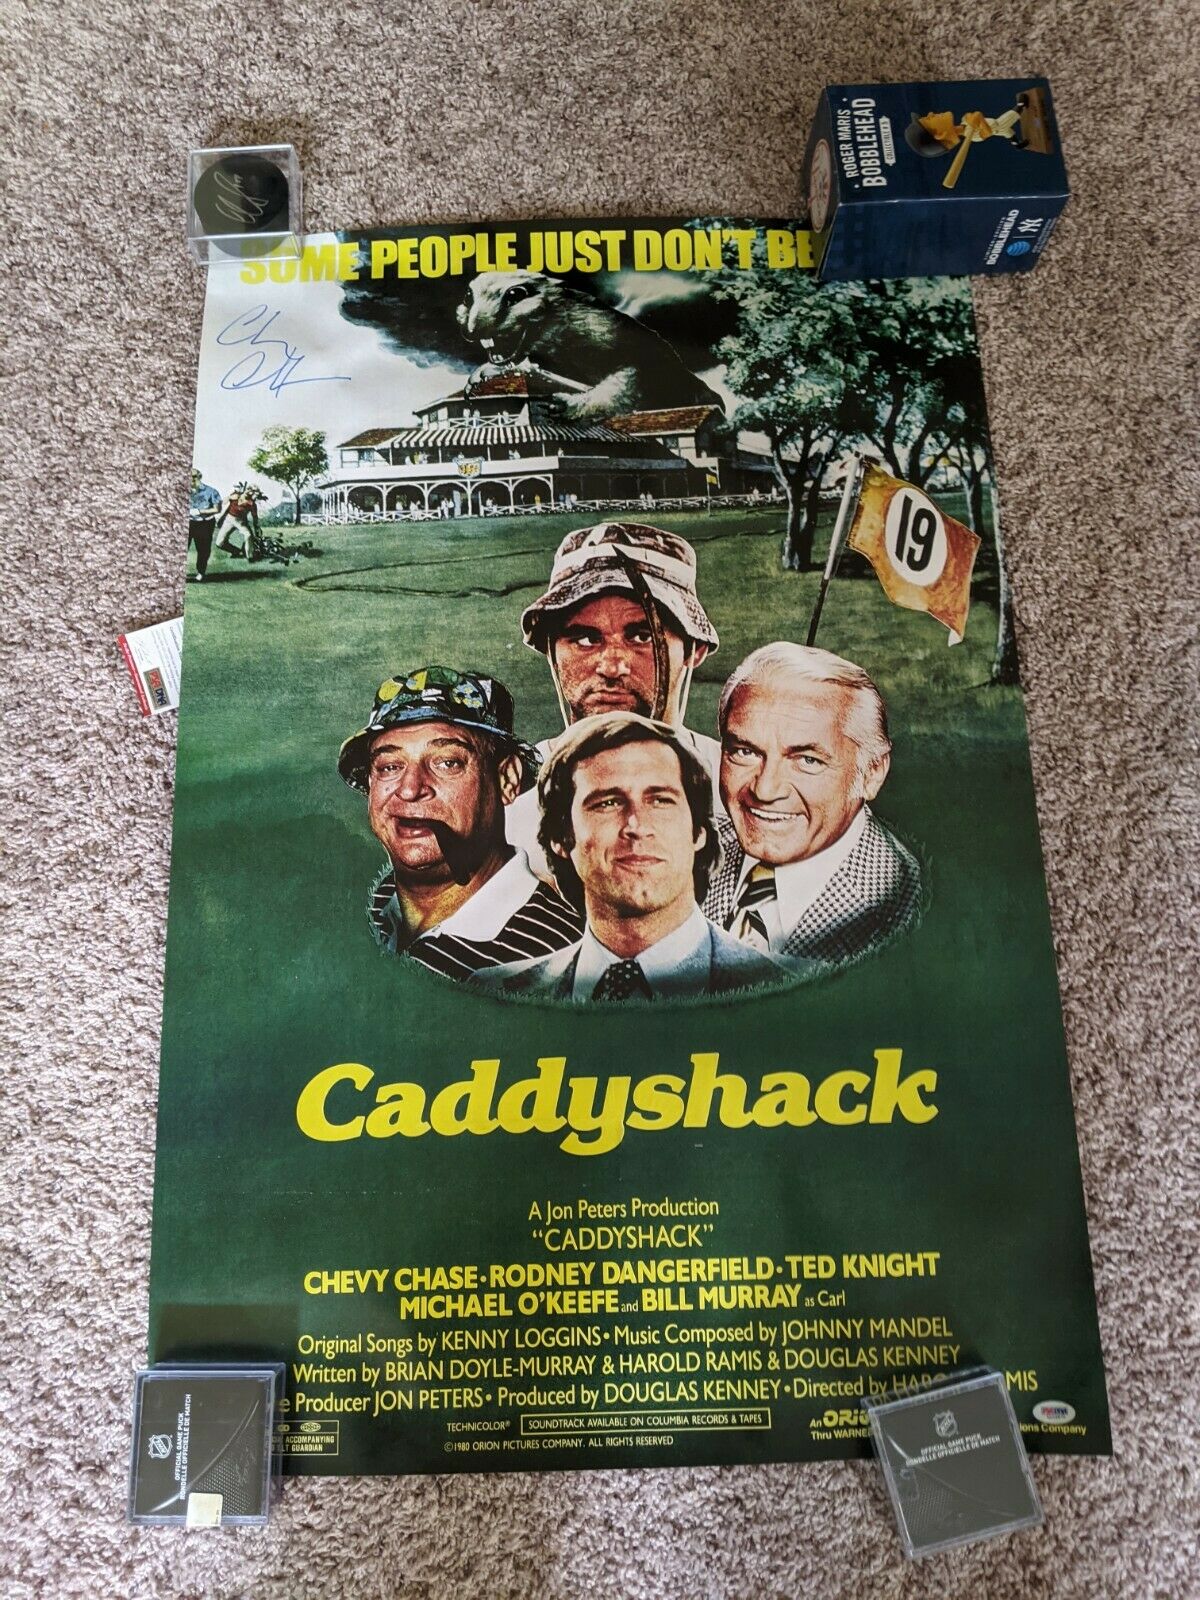 Chevy Chase Autographed Signed 24x36 Caddyshack Movie Poster Psa/dna